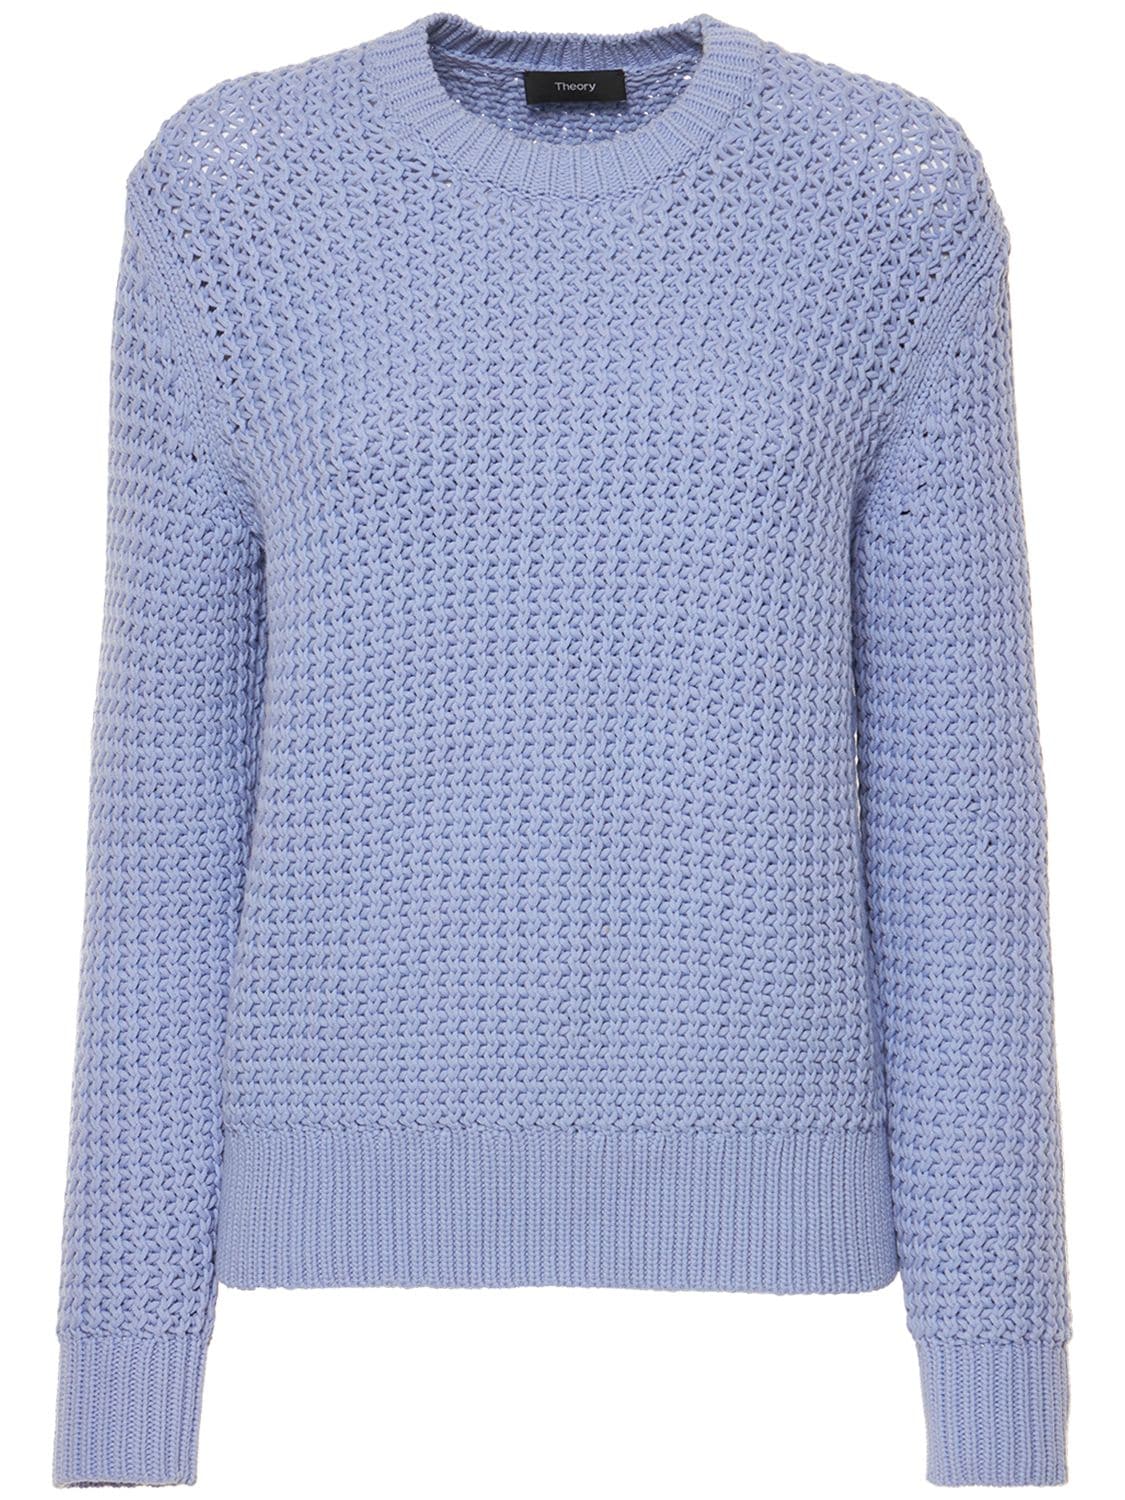 THEORY RICKRACK RIBBED COTTON BLEND SWEATER